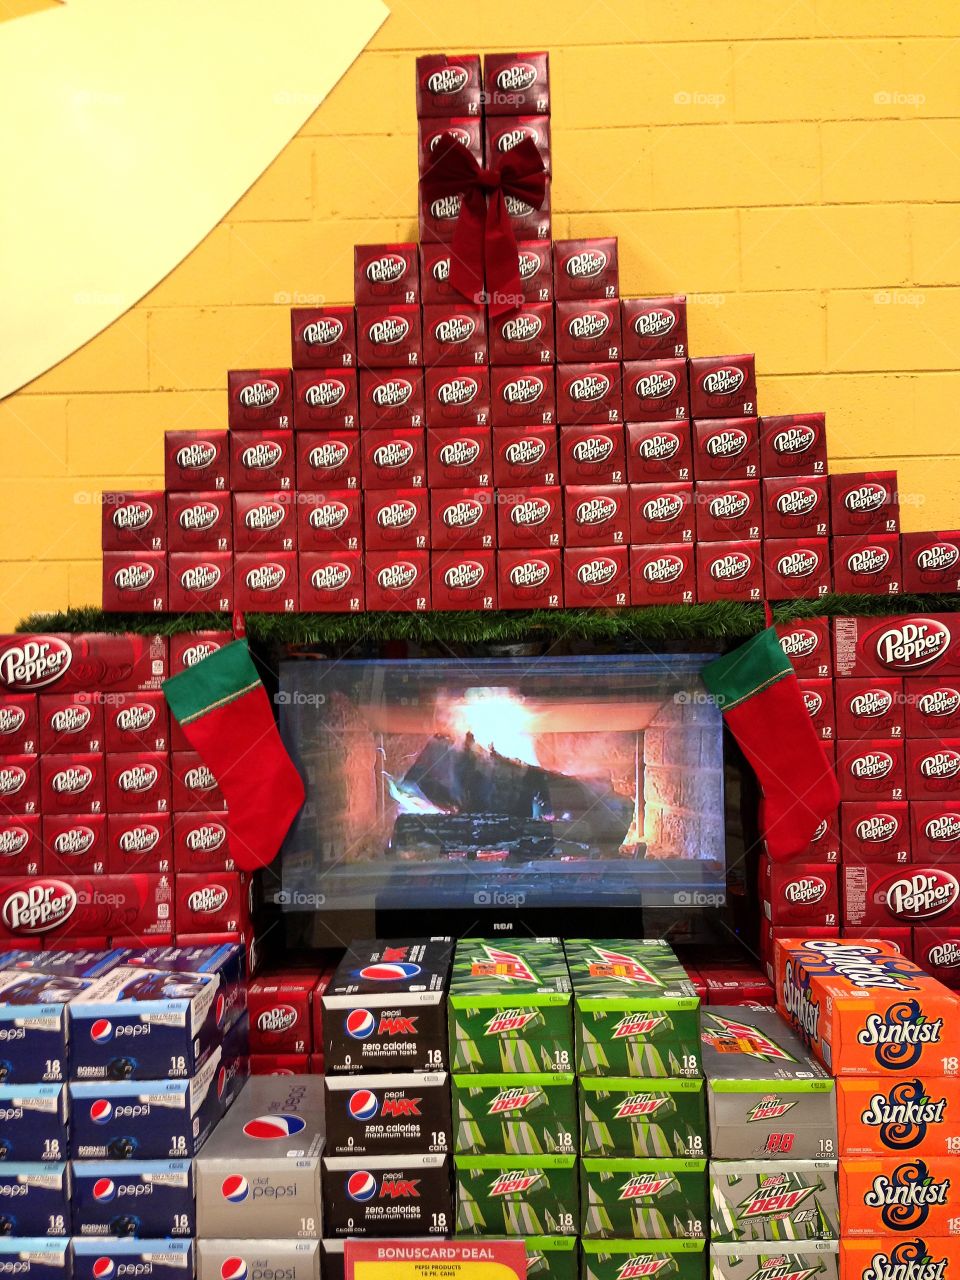 A winter themed soda pop display in a grocery store.